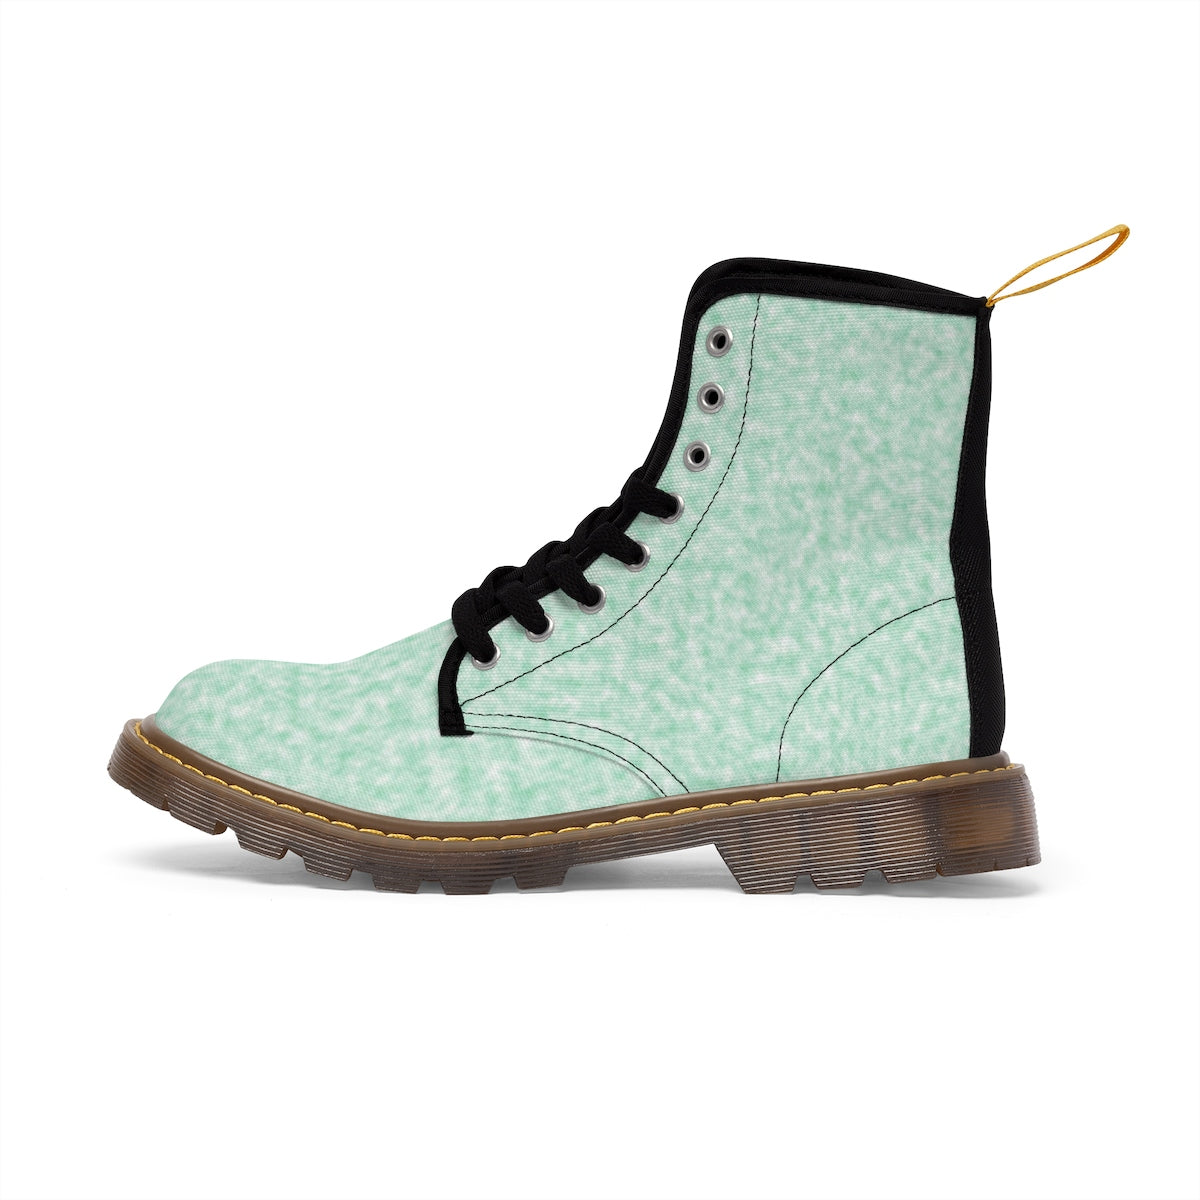 Seafoam Green and White Clouds Boots